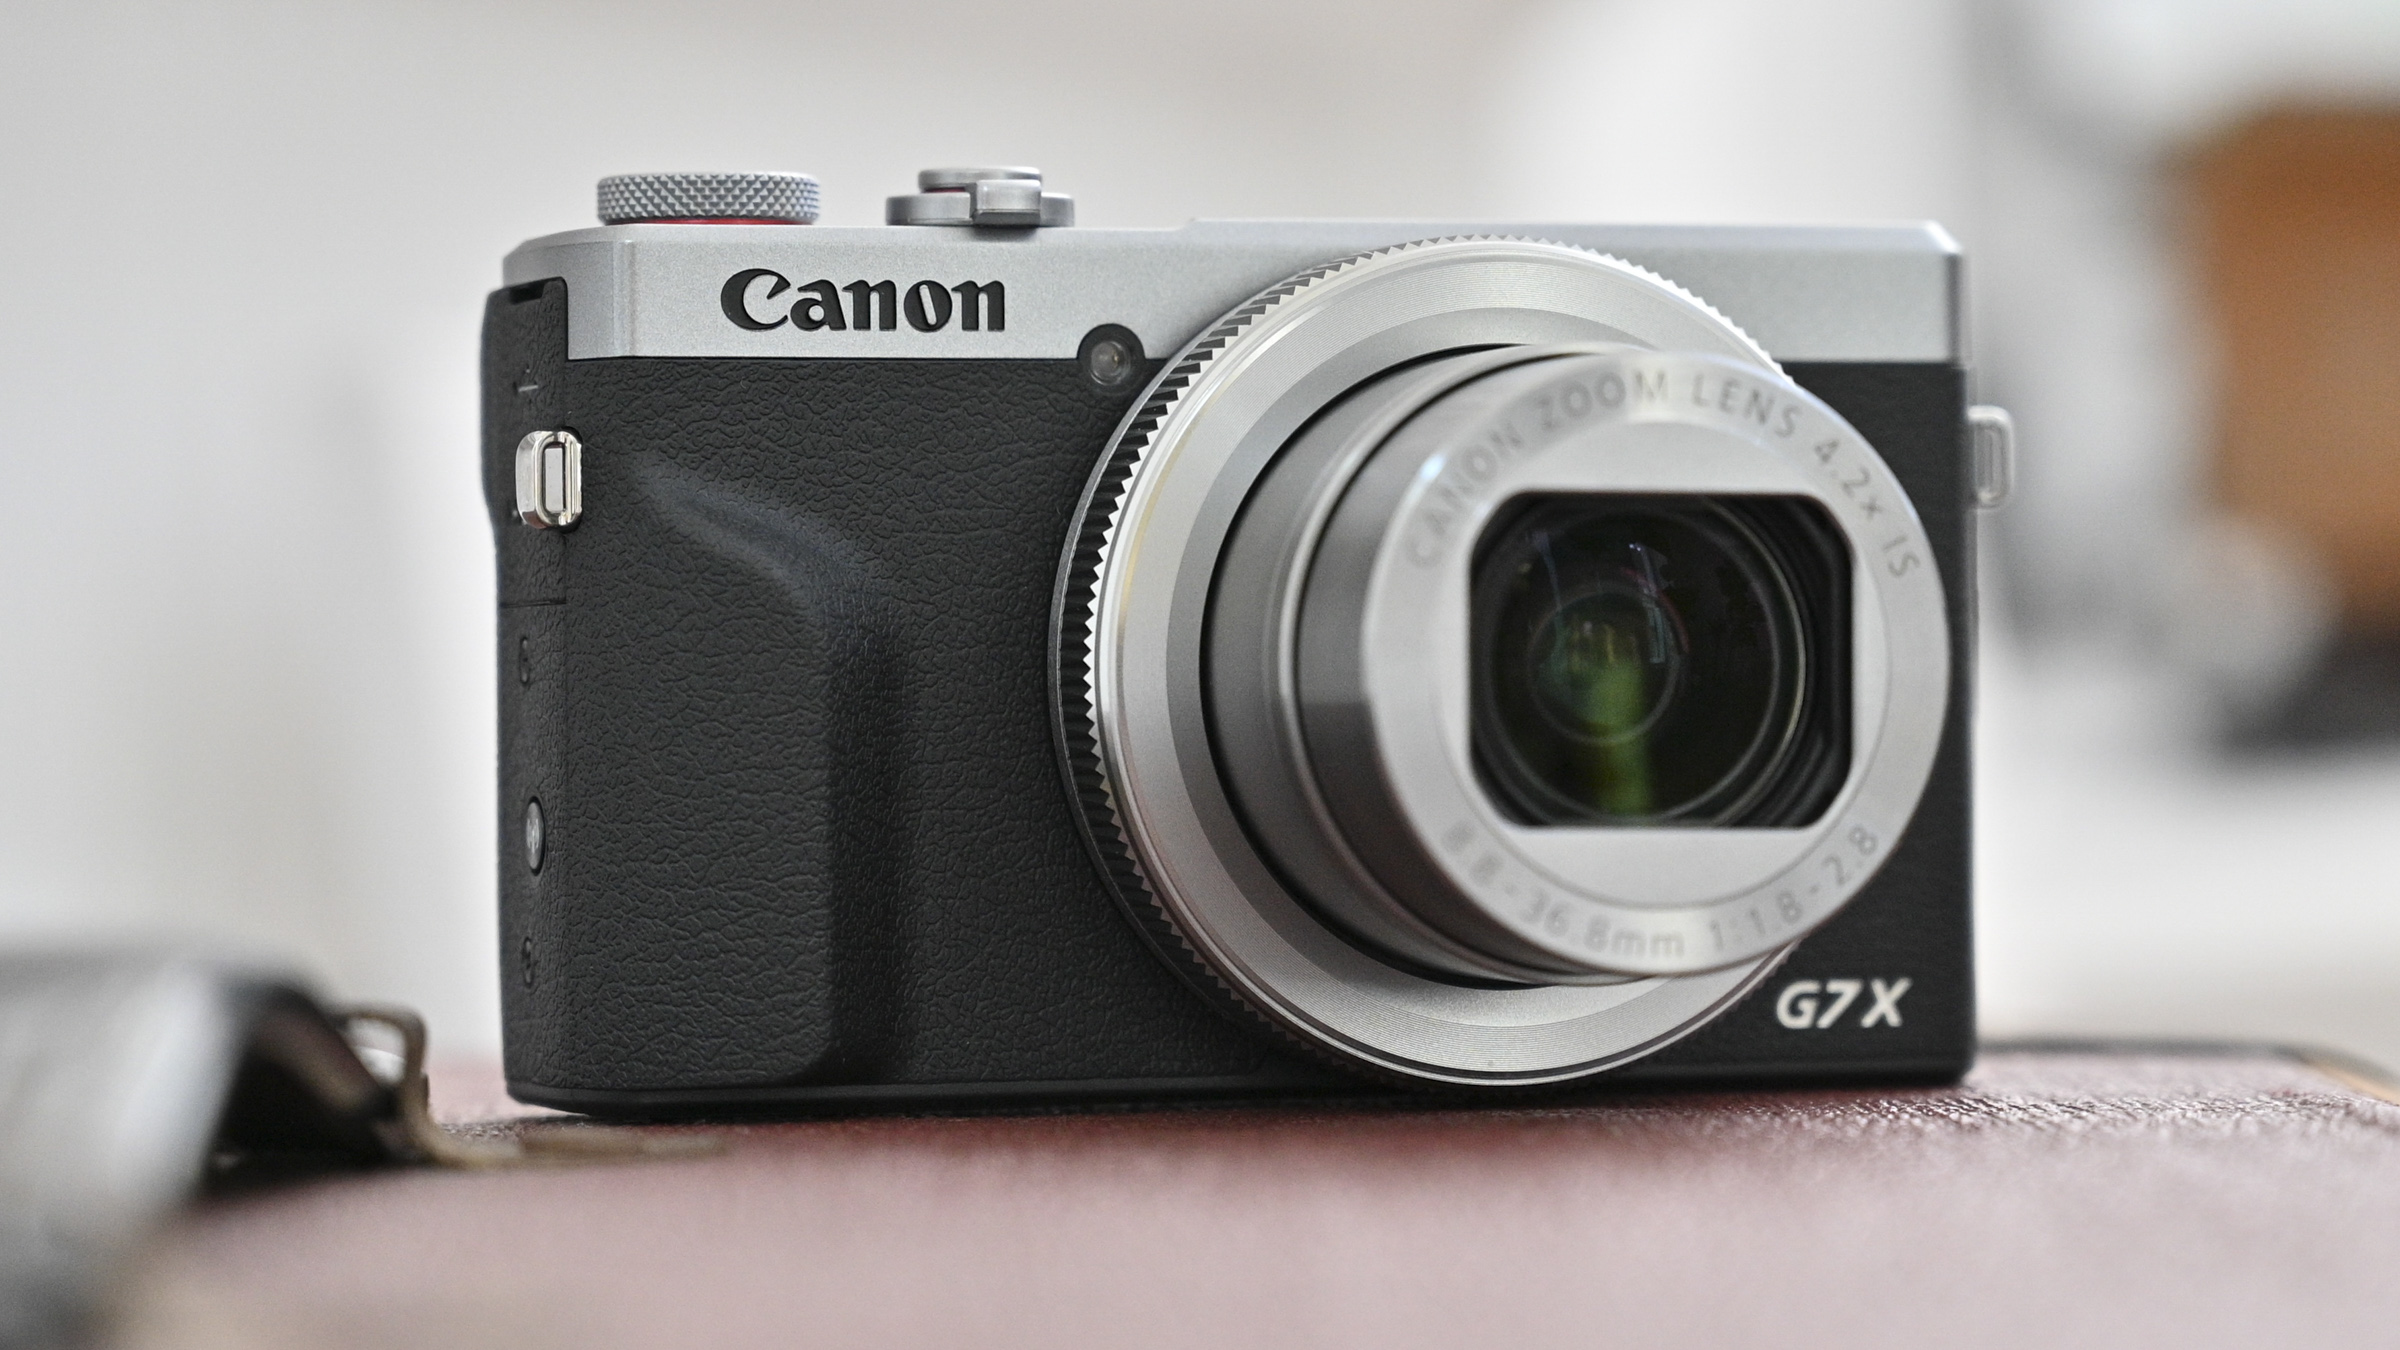 Best Compact Camera 2019: 10 Top Compact Cameras to Suit All Abilities 7